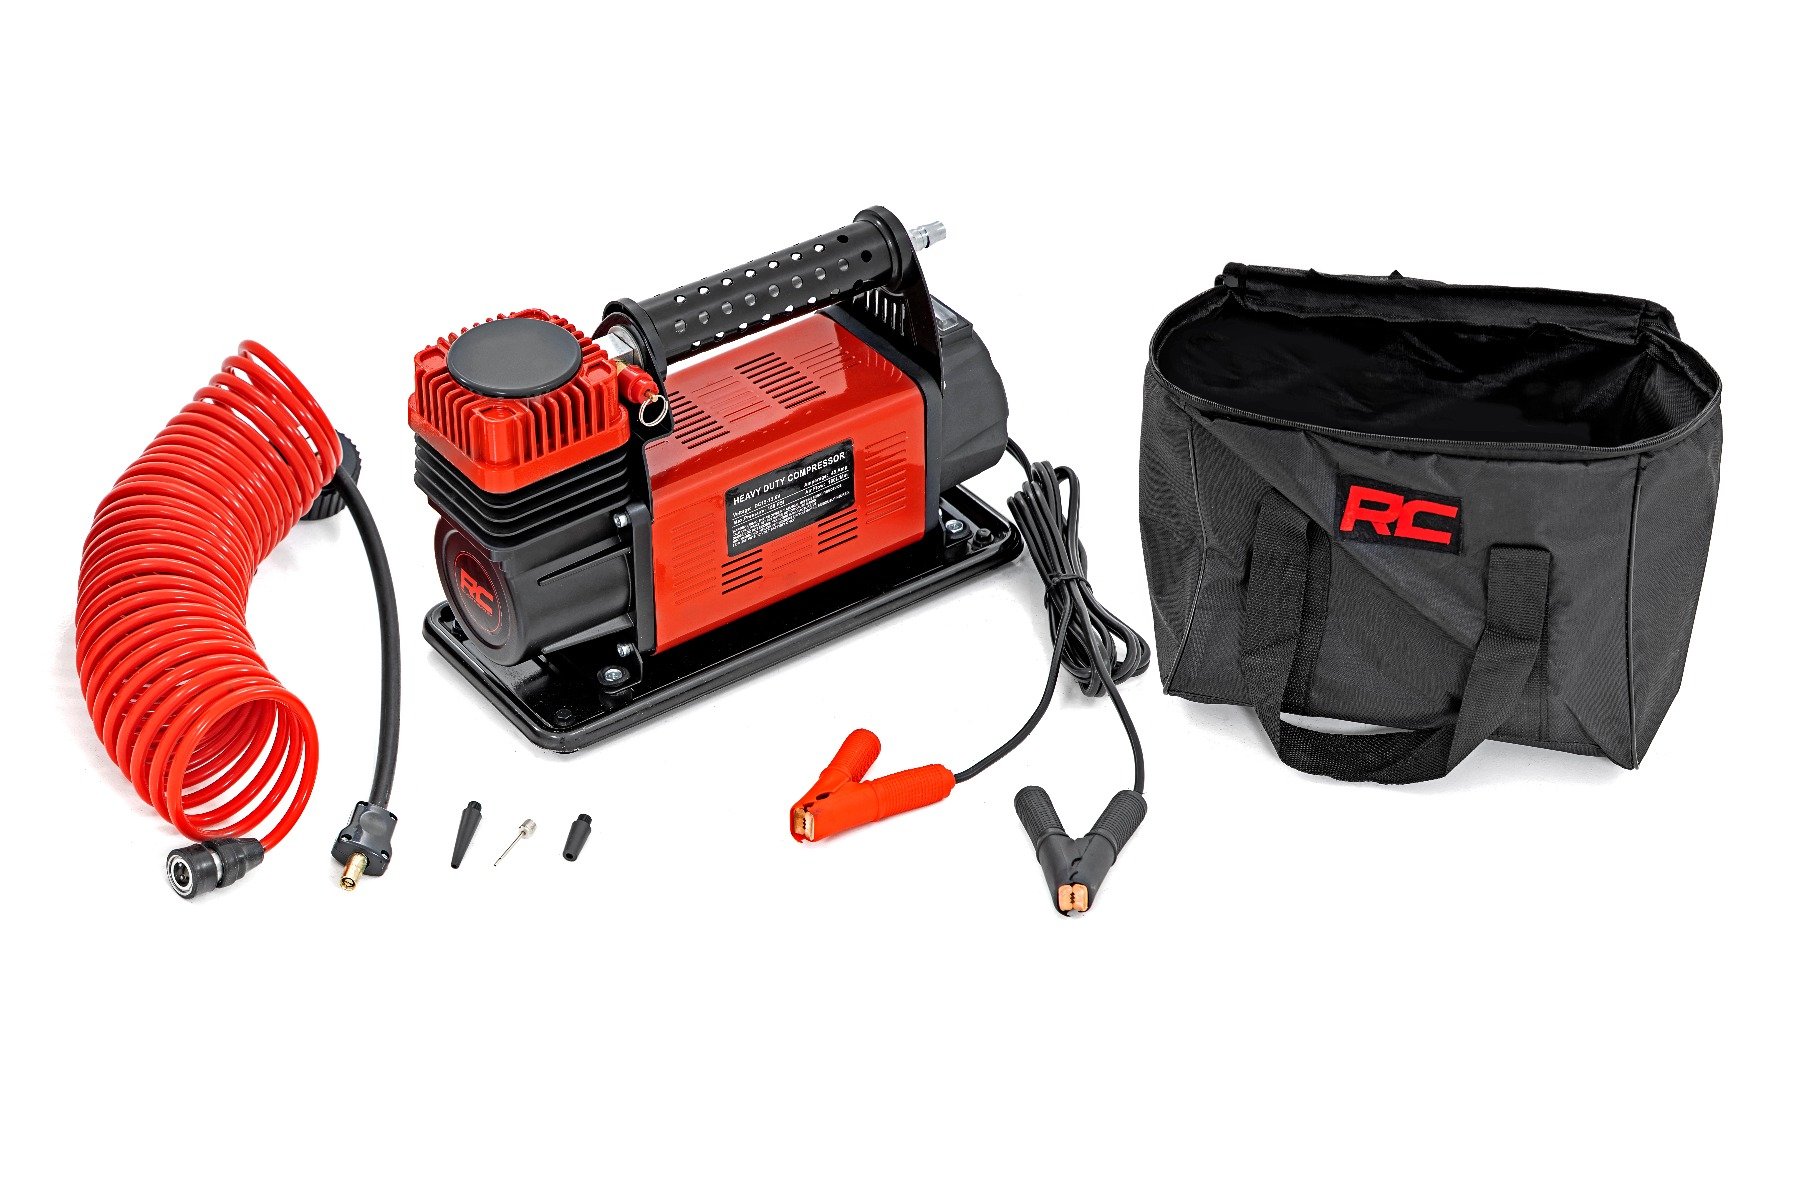 Rough Country RS200 Tire Air Compressor Kit